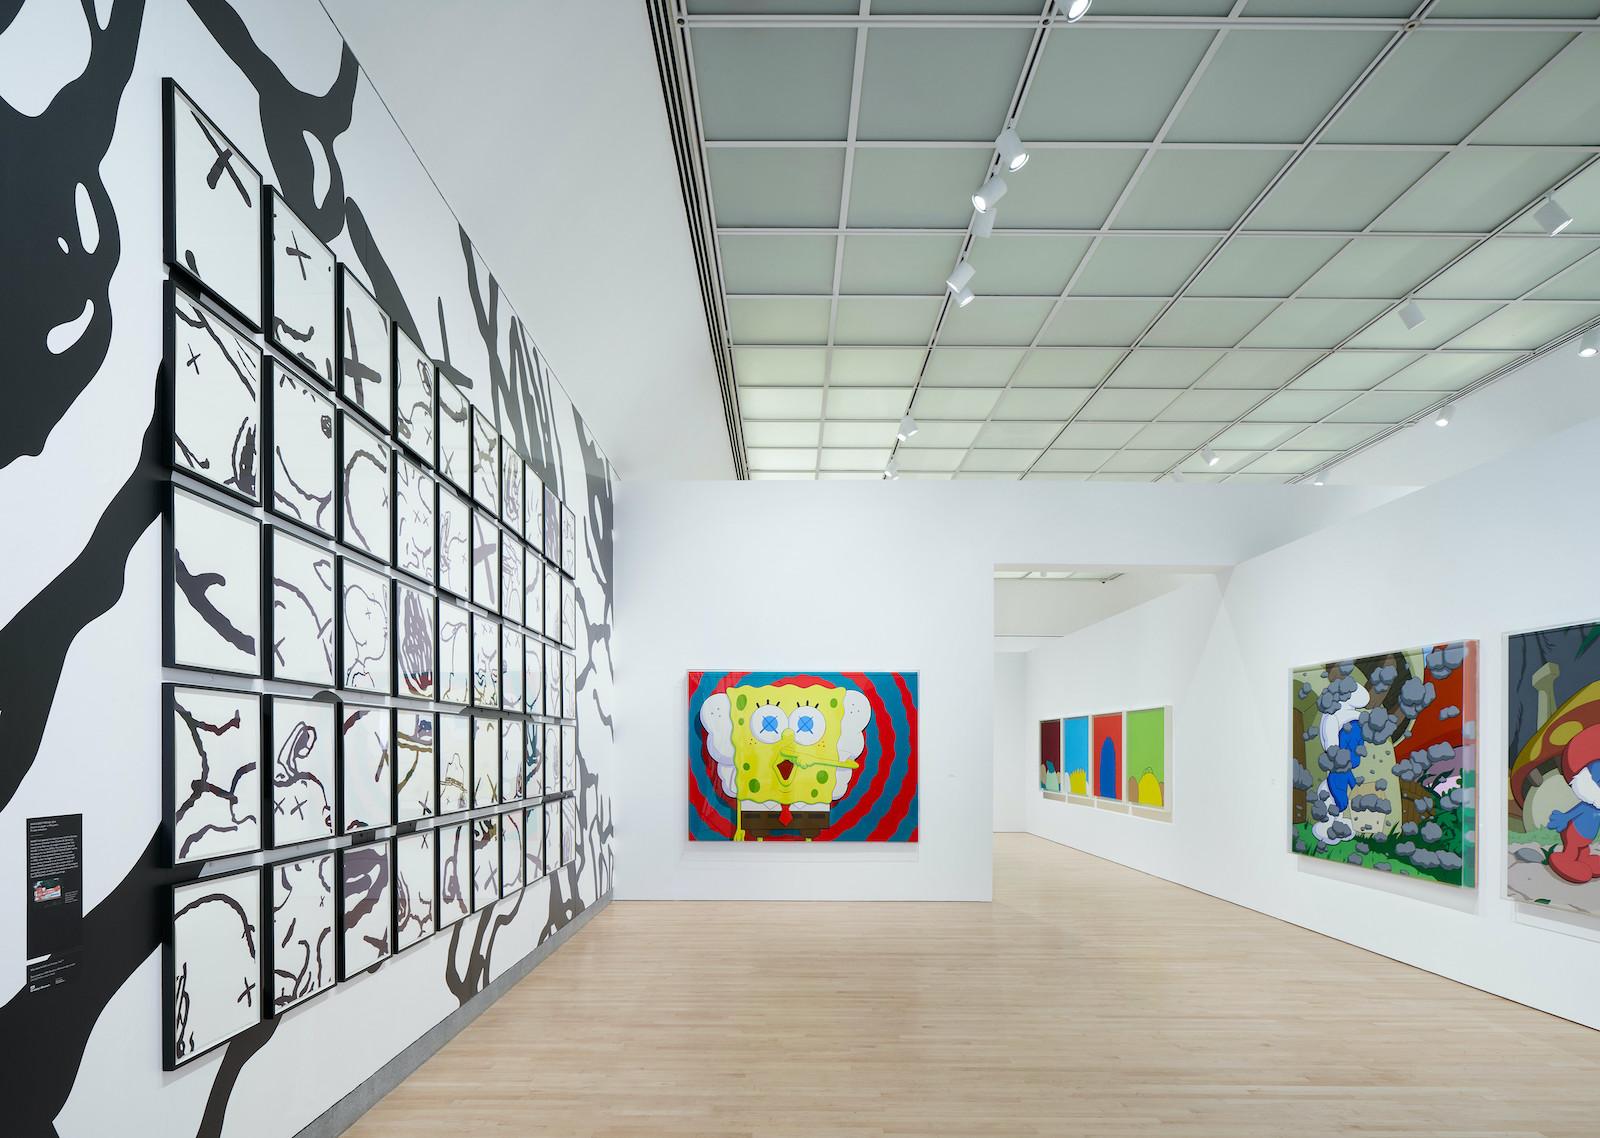 Installation view, KAWS: WHAT PARTY, Brooklyn Museum, February 26, 2021 - September 5, 2021.